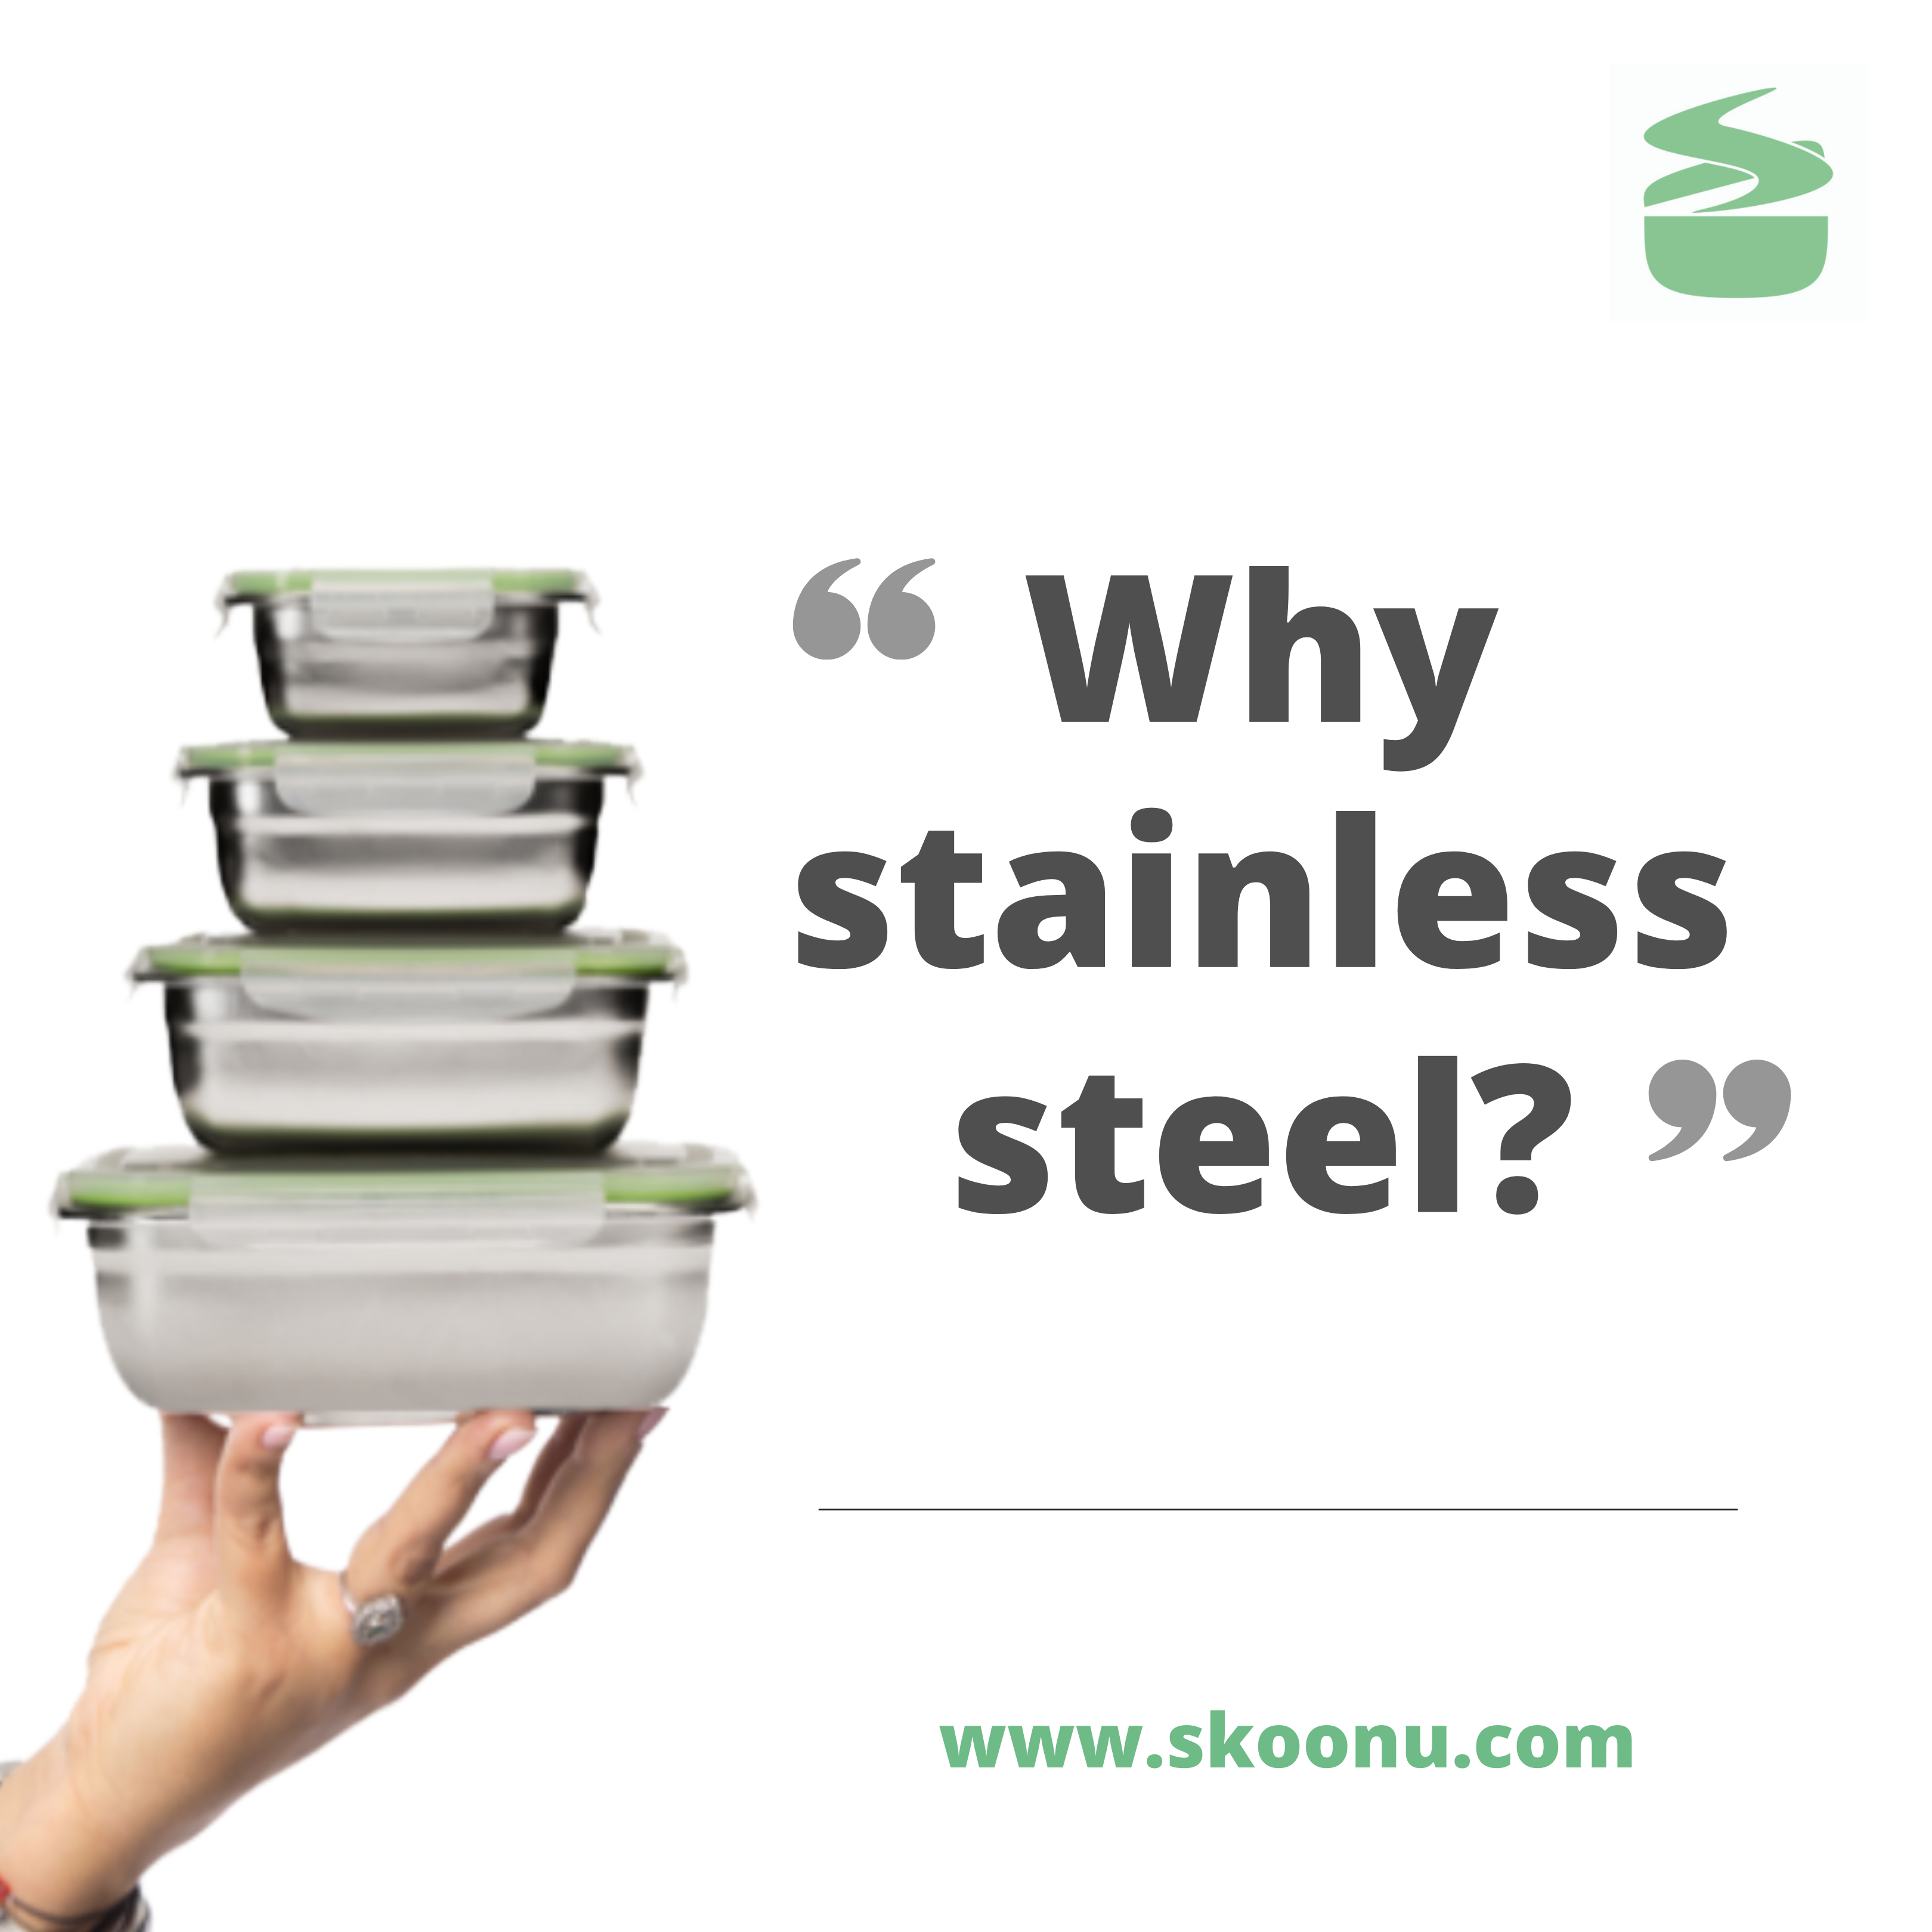 Why Is Skoonu Made from Stainless Steel? 